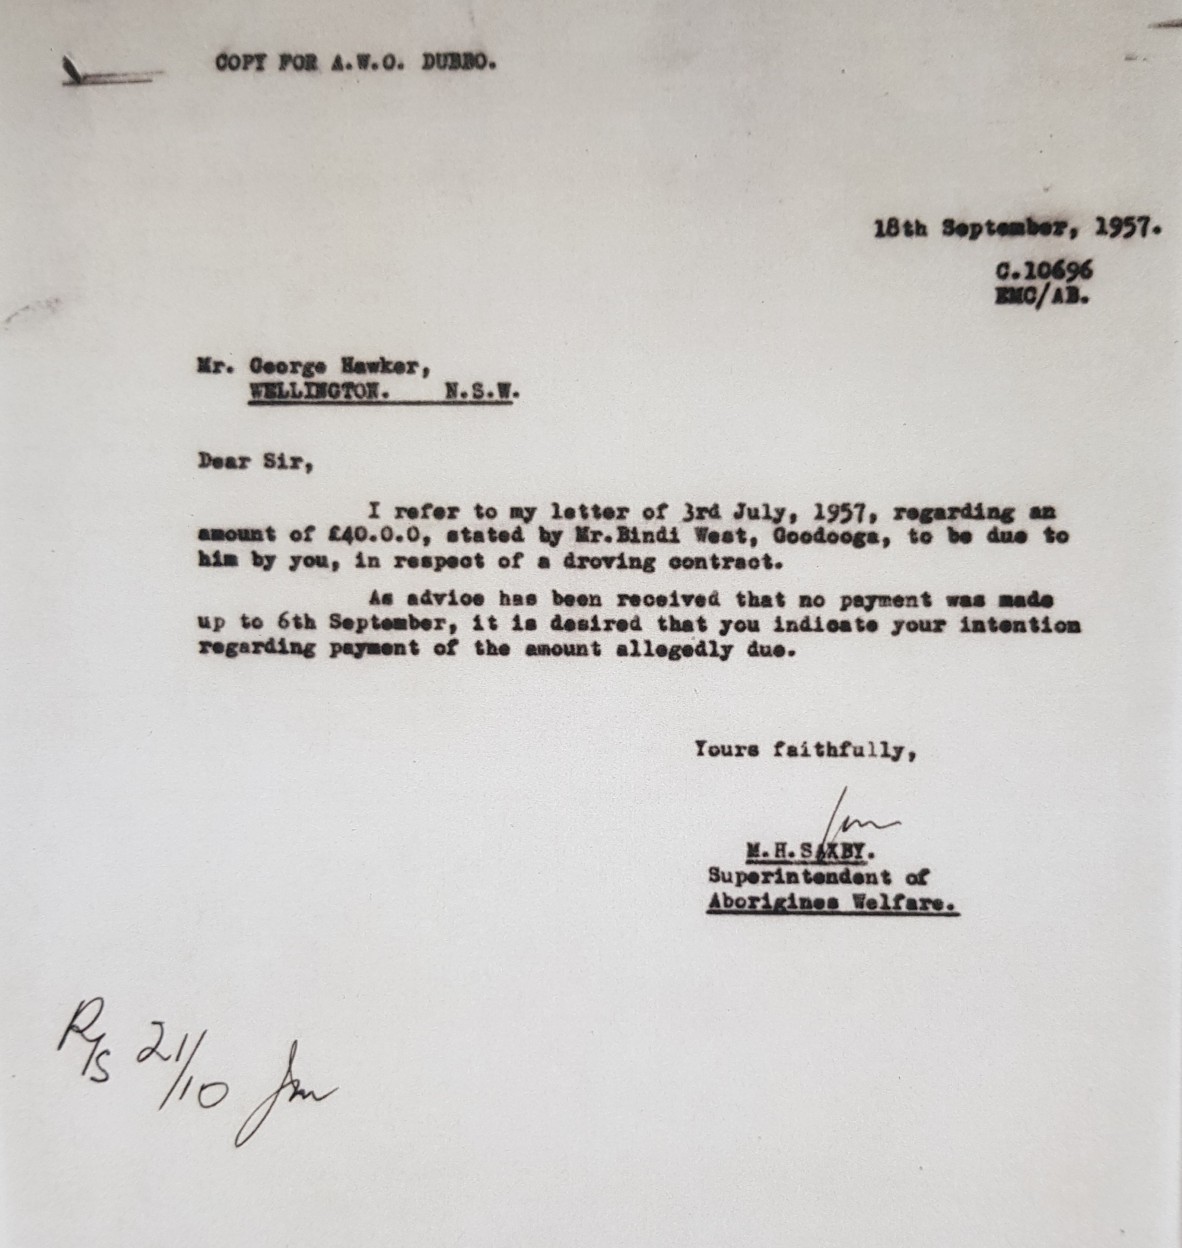 Straight away 2 days later ,on 18th Sep 1957 Saxby sends a letter to George Hawker, the Stock Agent at Wellington, asking him to indicate his intentions to pay the 40 pound owing to Bindi West.